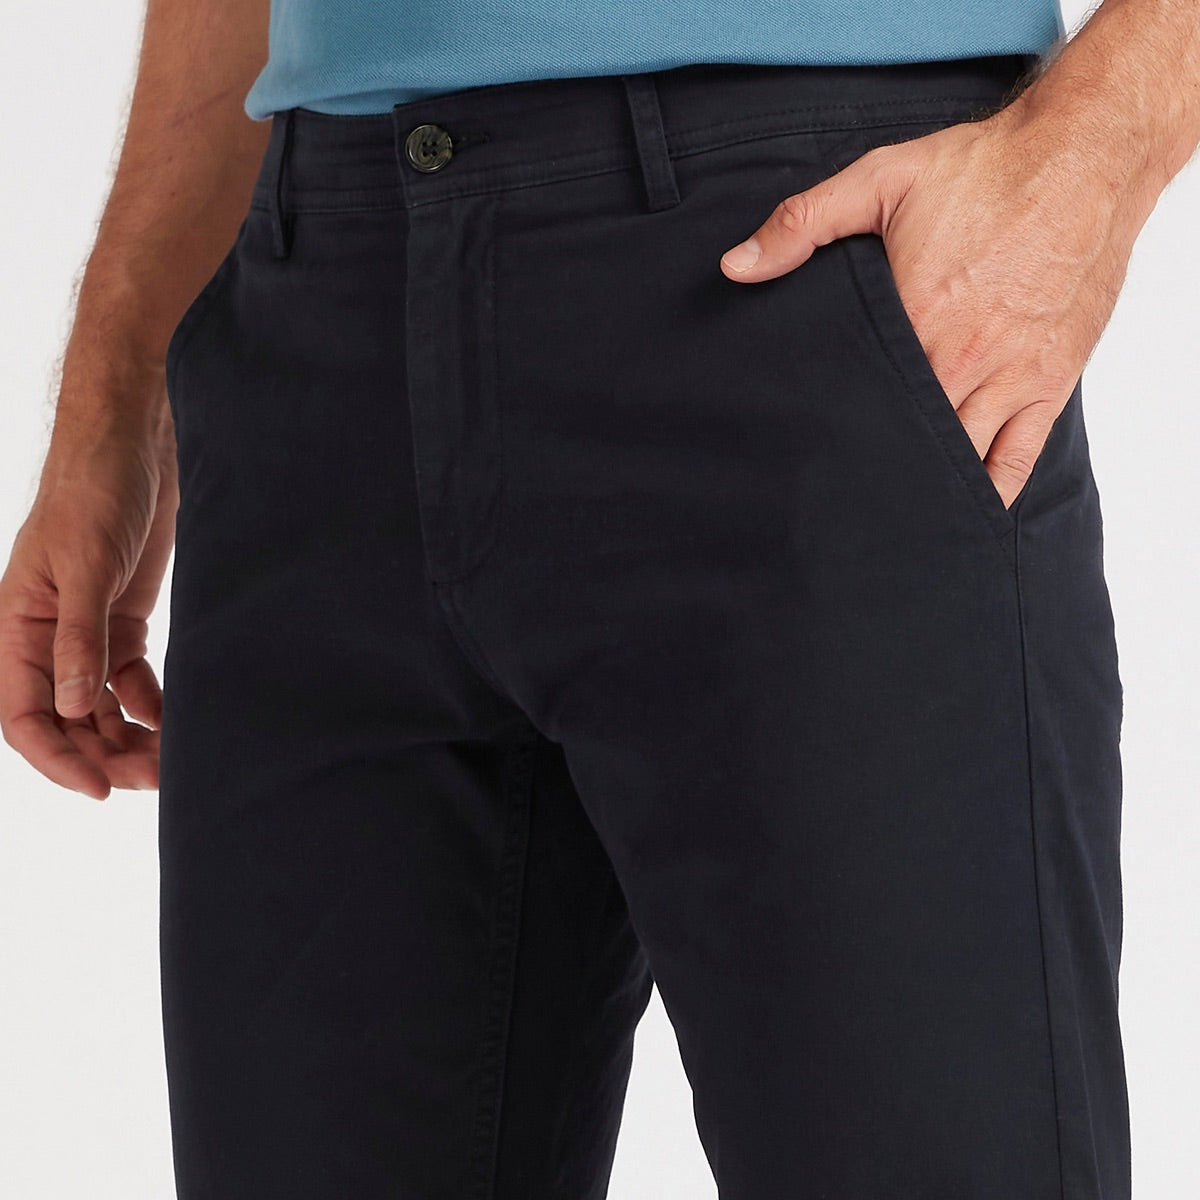 Jet Black Solid Chinos with Pockets and Button Closure